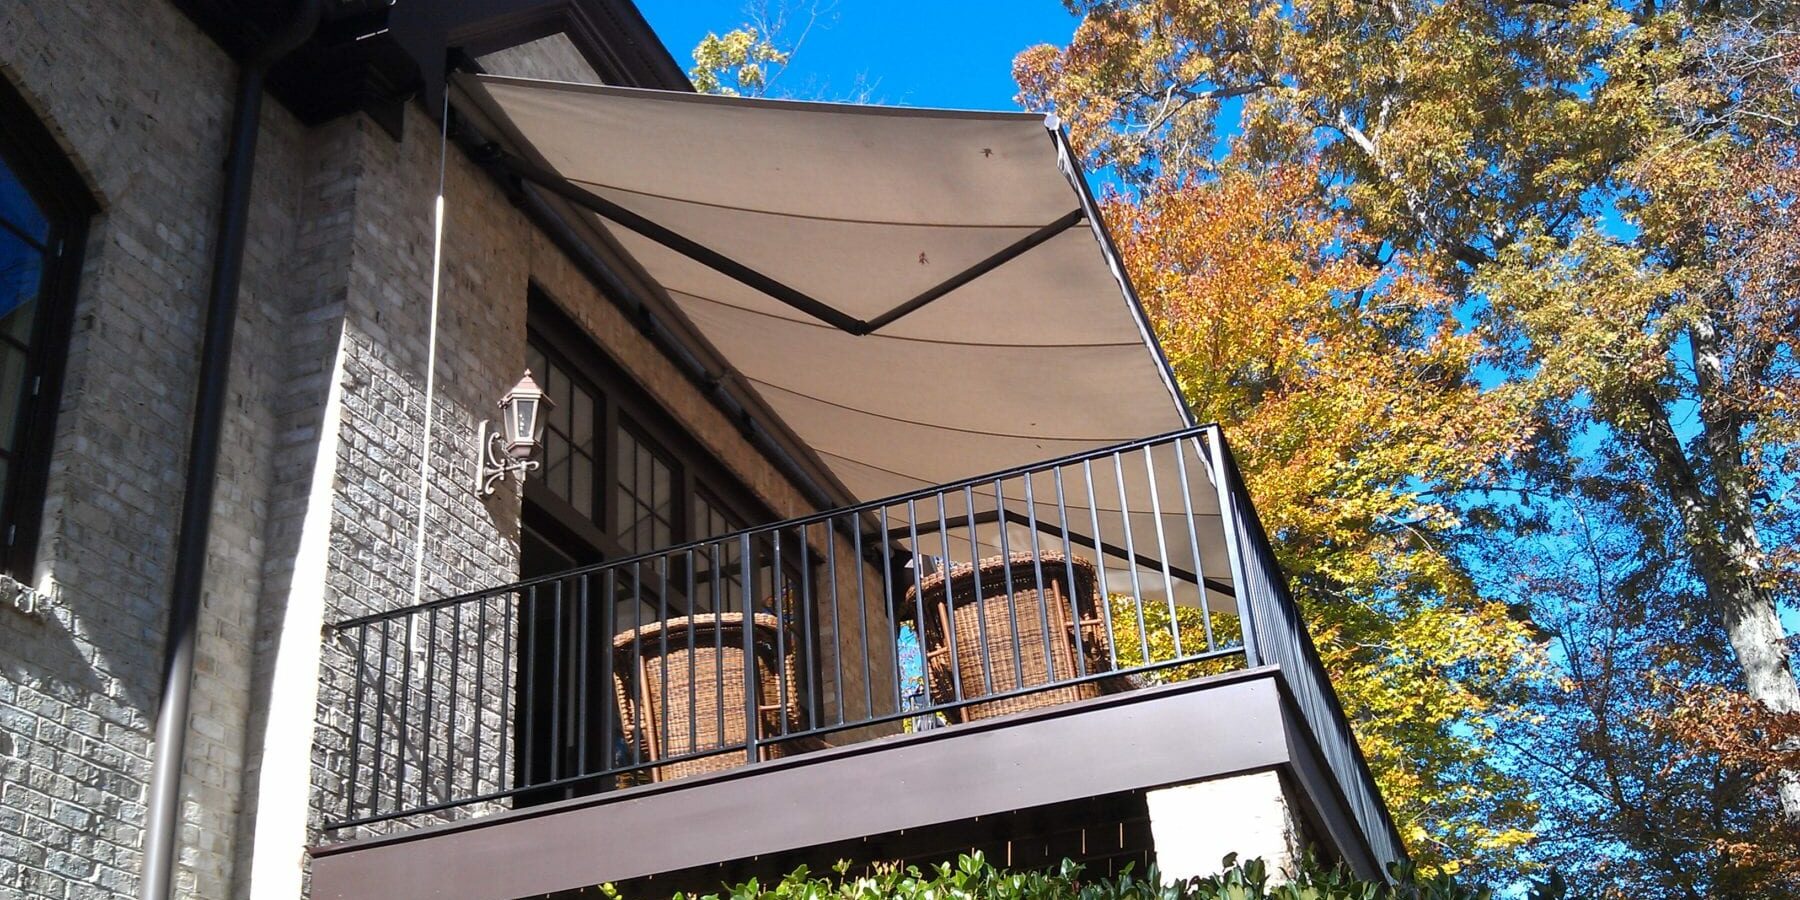 Retractable awnings are designed to fold or roll back when not in use. The retraction may be manual or motorized. Sensors, remote controls, and buttons switches are used to operate the motorized options. These popular outdoor coverings are available in different fabrics. Some common choices include solution-dyed acrylic and vinyl-coated fabrics.